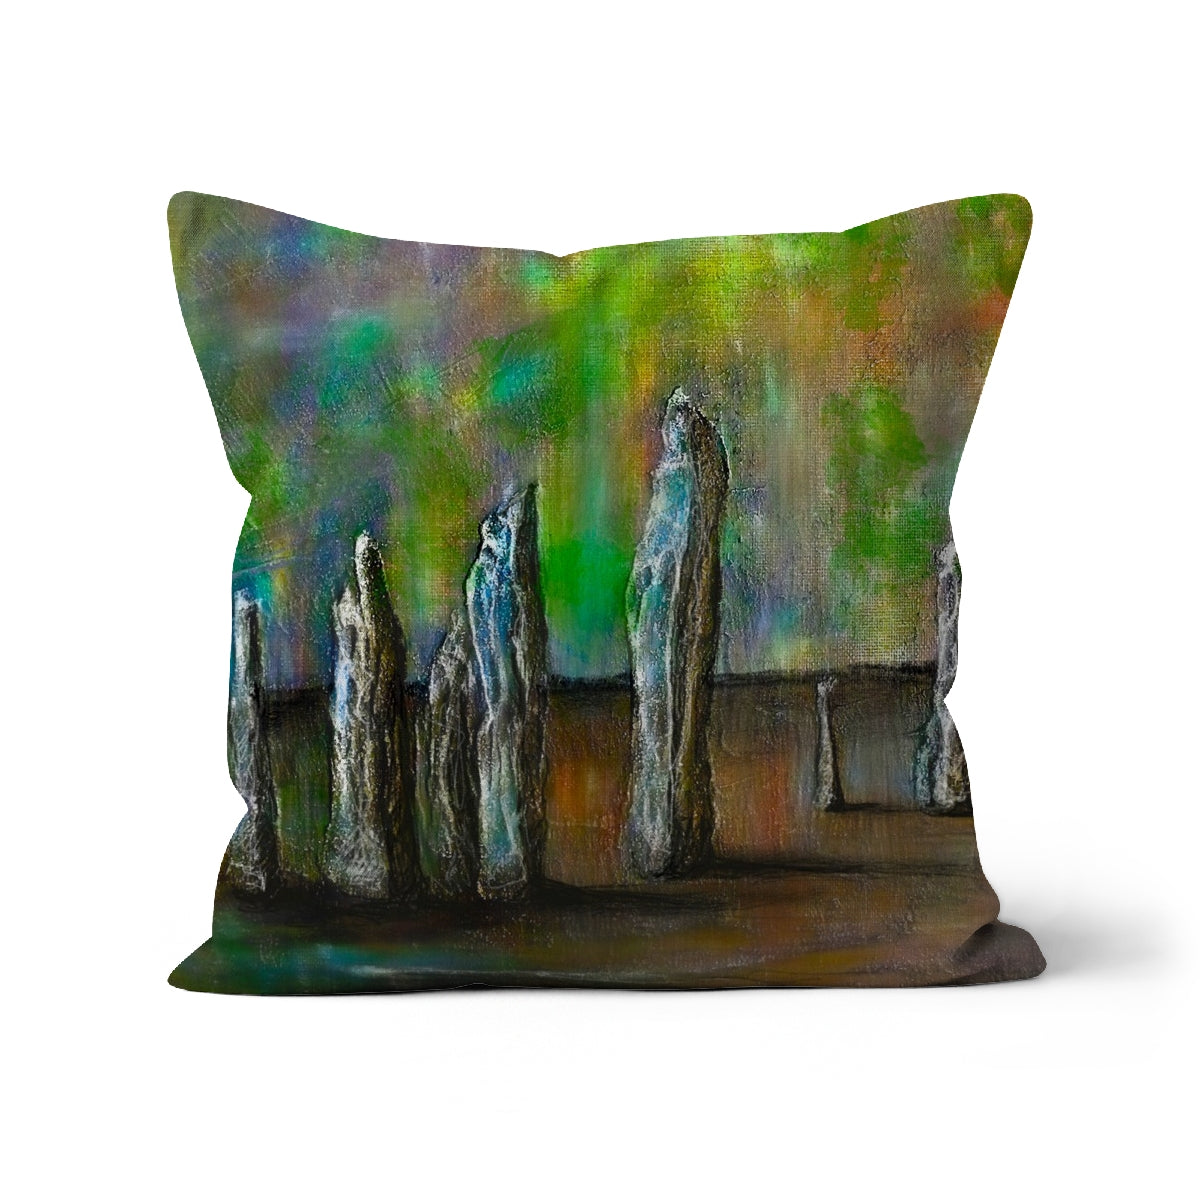 Callanish Northern Lights Art Gifts Cushion-Cushions-Hebridean Islands Art Gallery-Canvas-22"x22"-Paintings, Prints, Homeware, Art Gifts From Scotland By Scottish Artist Kevin Hunter